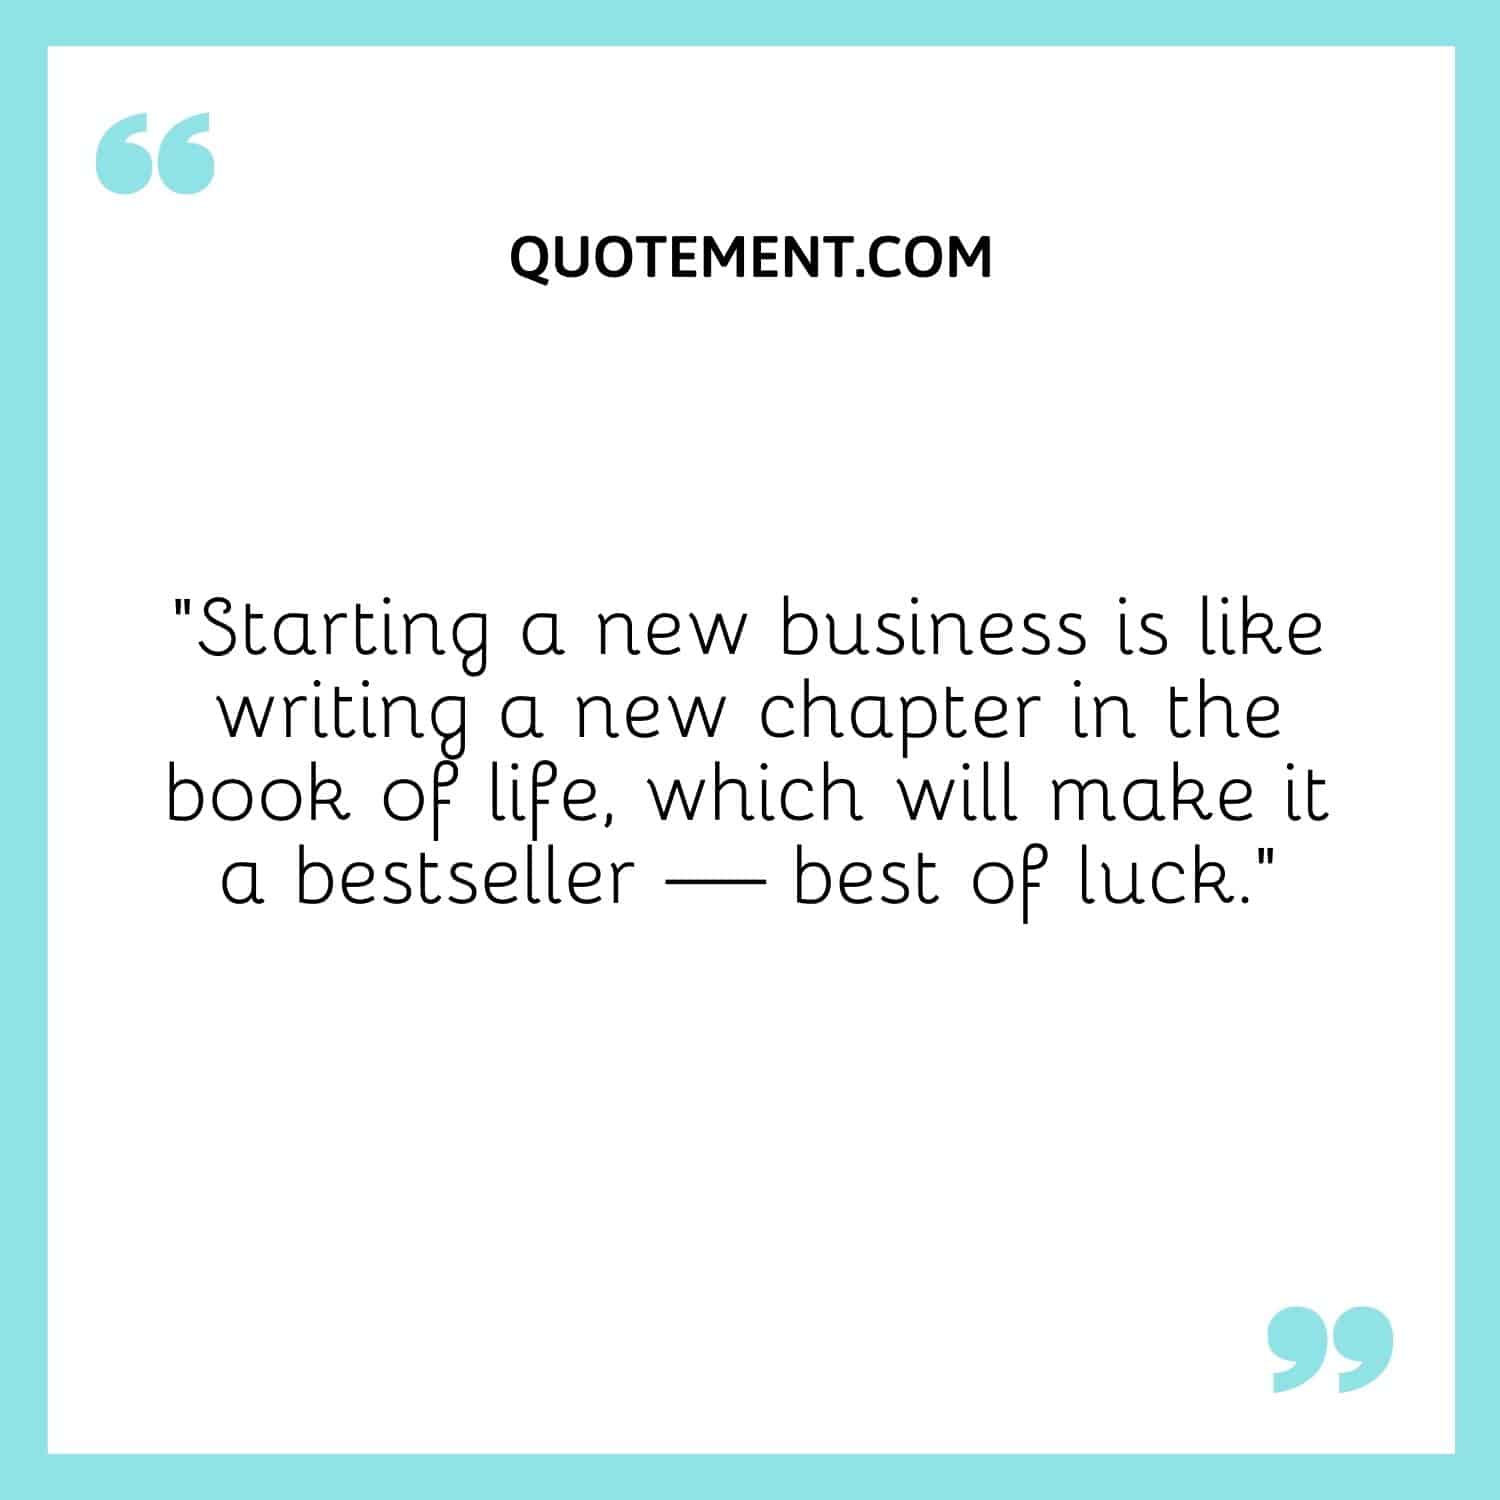 Starting a new business is like writing a new chapter in the book of life